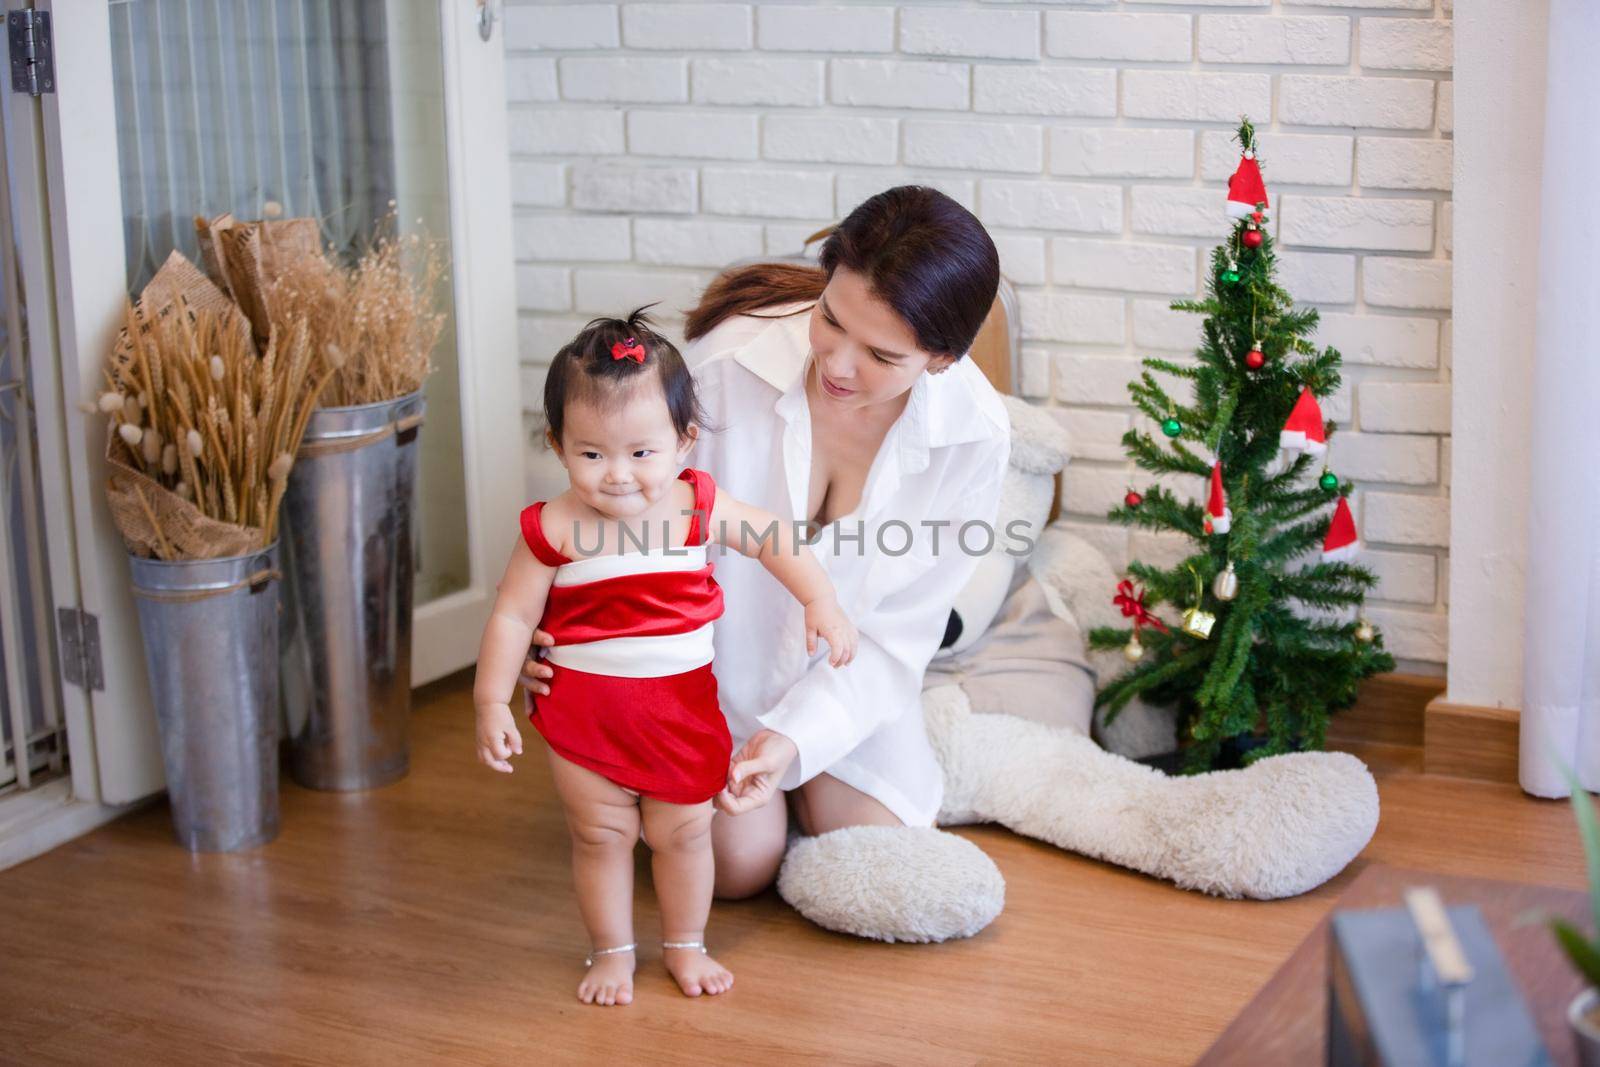 Full Length Of Cute Baby Girl Wearing Santa Costume While Sitting With Christmas Decorations